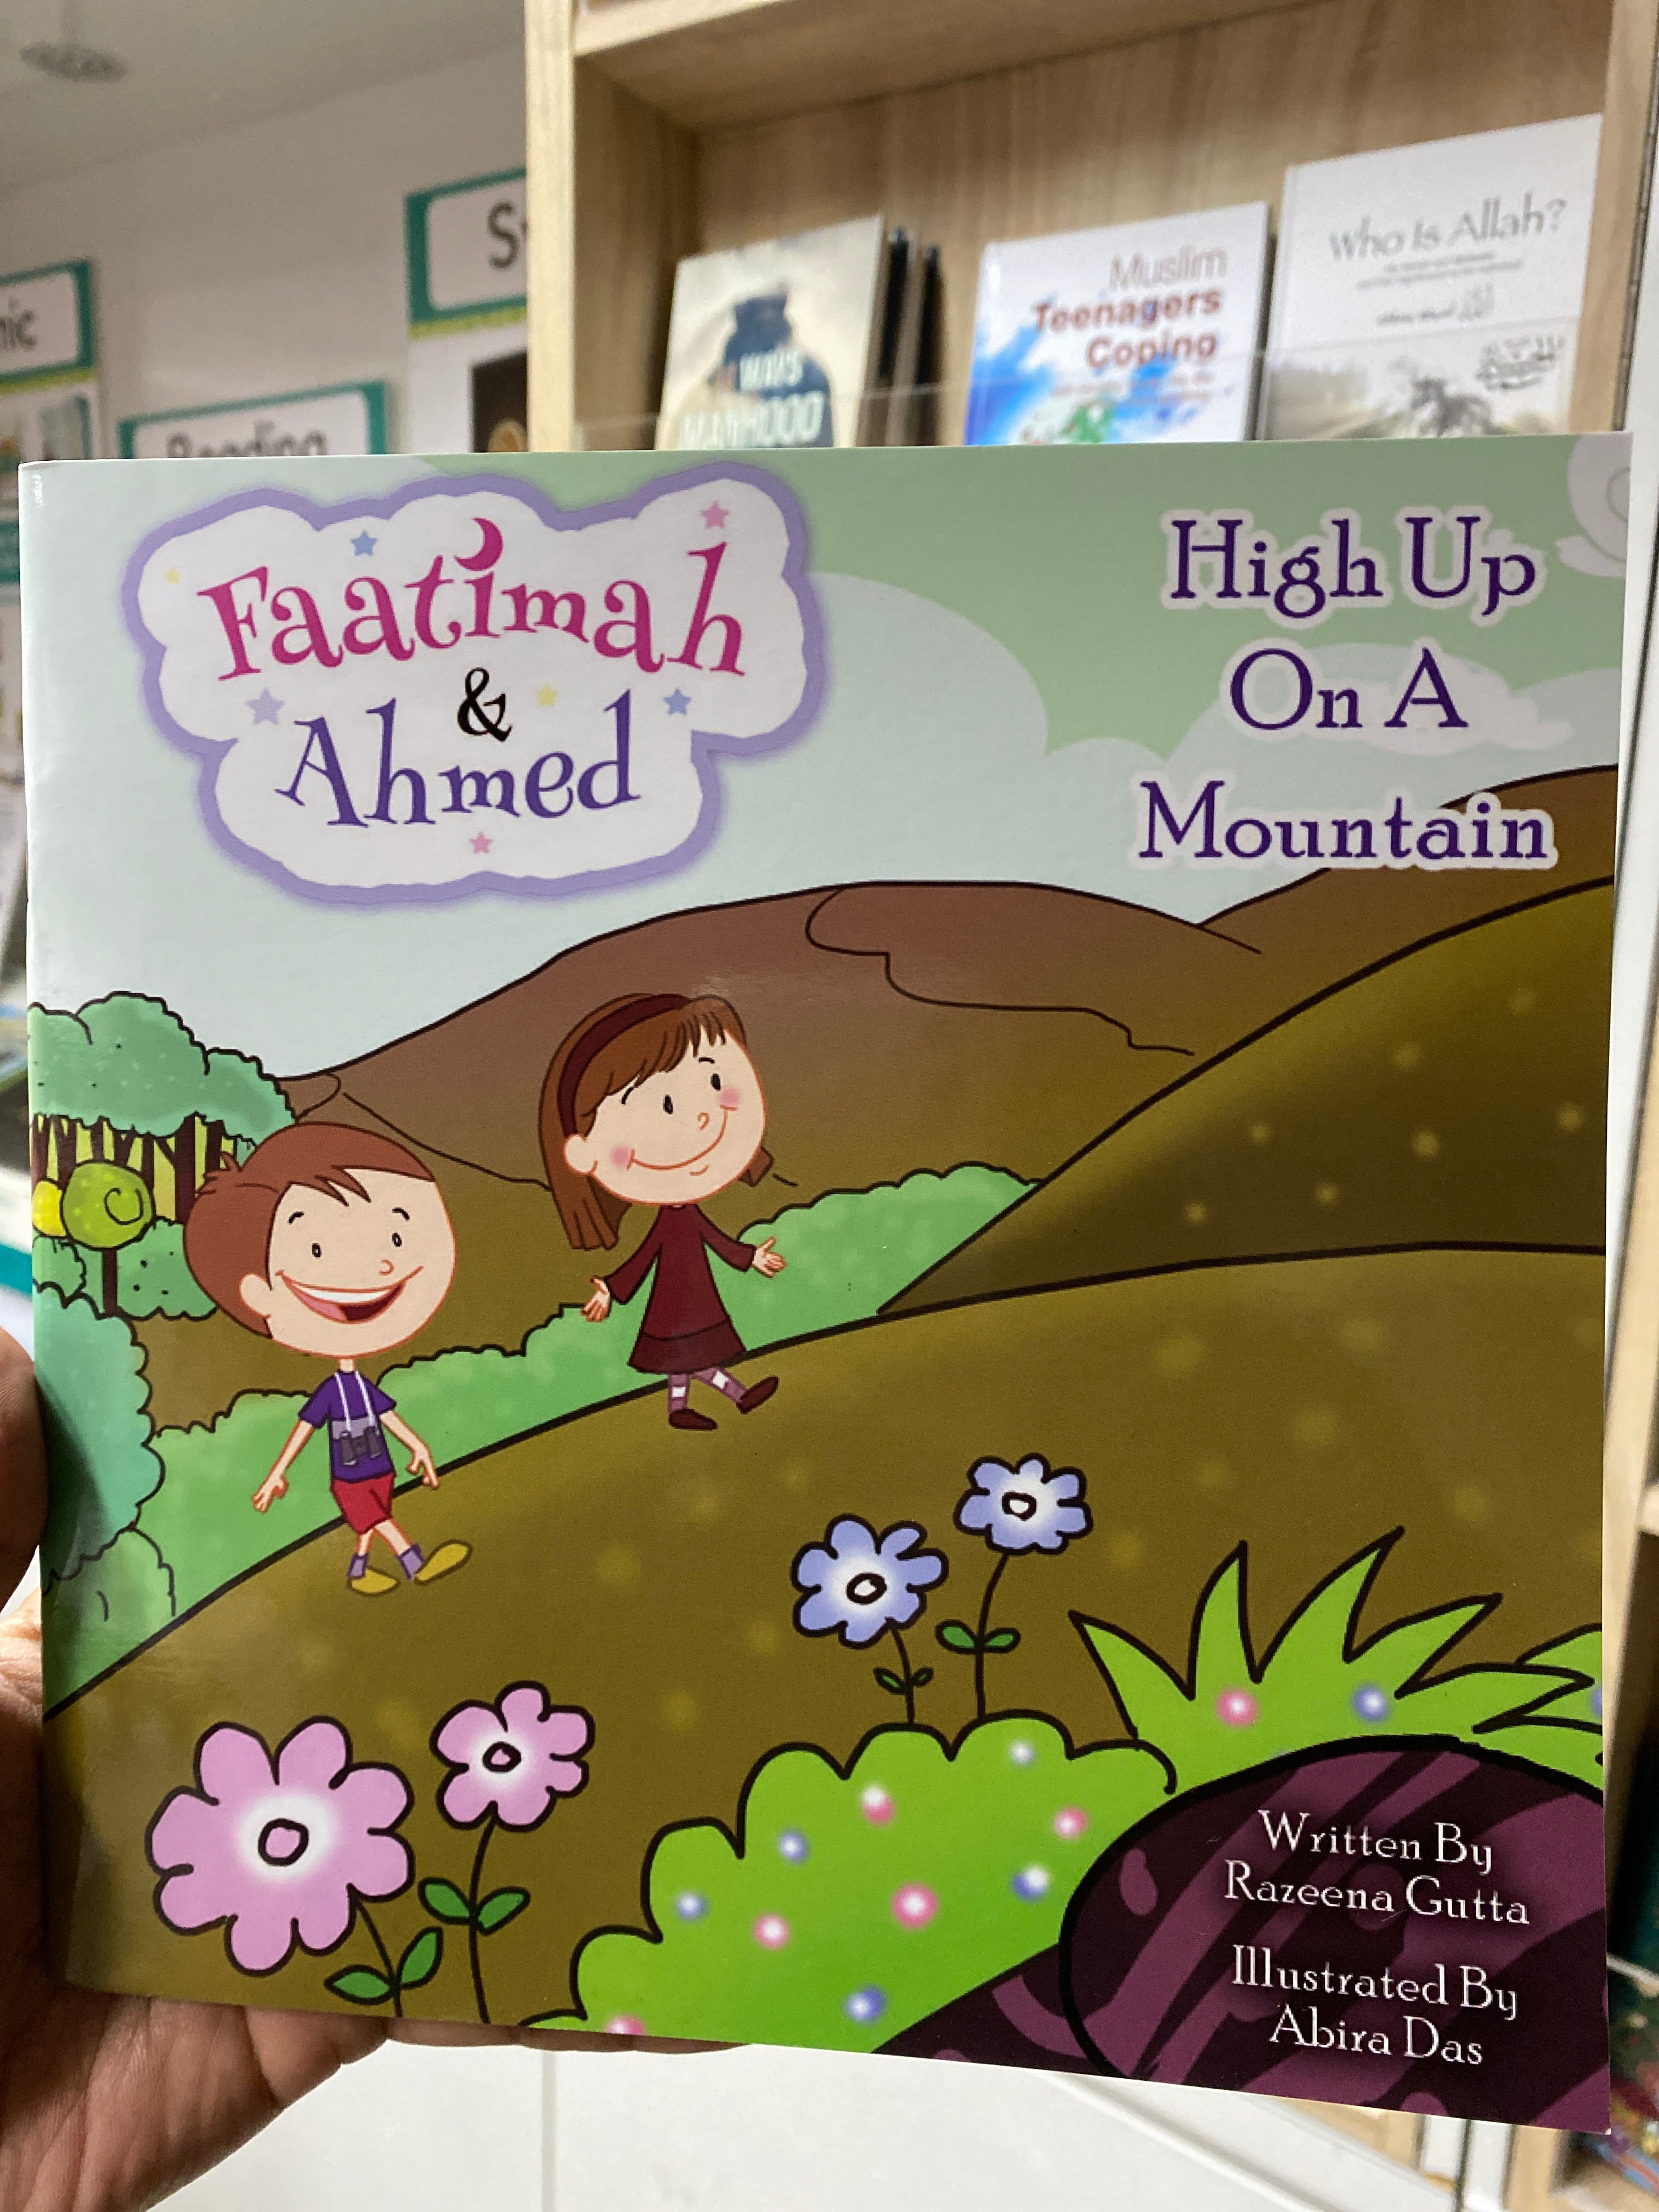 Faatimah & Ahmed: High Up On A Mountain